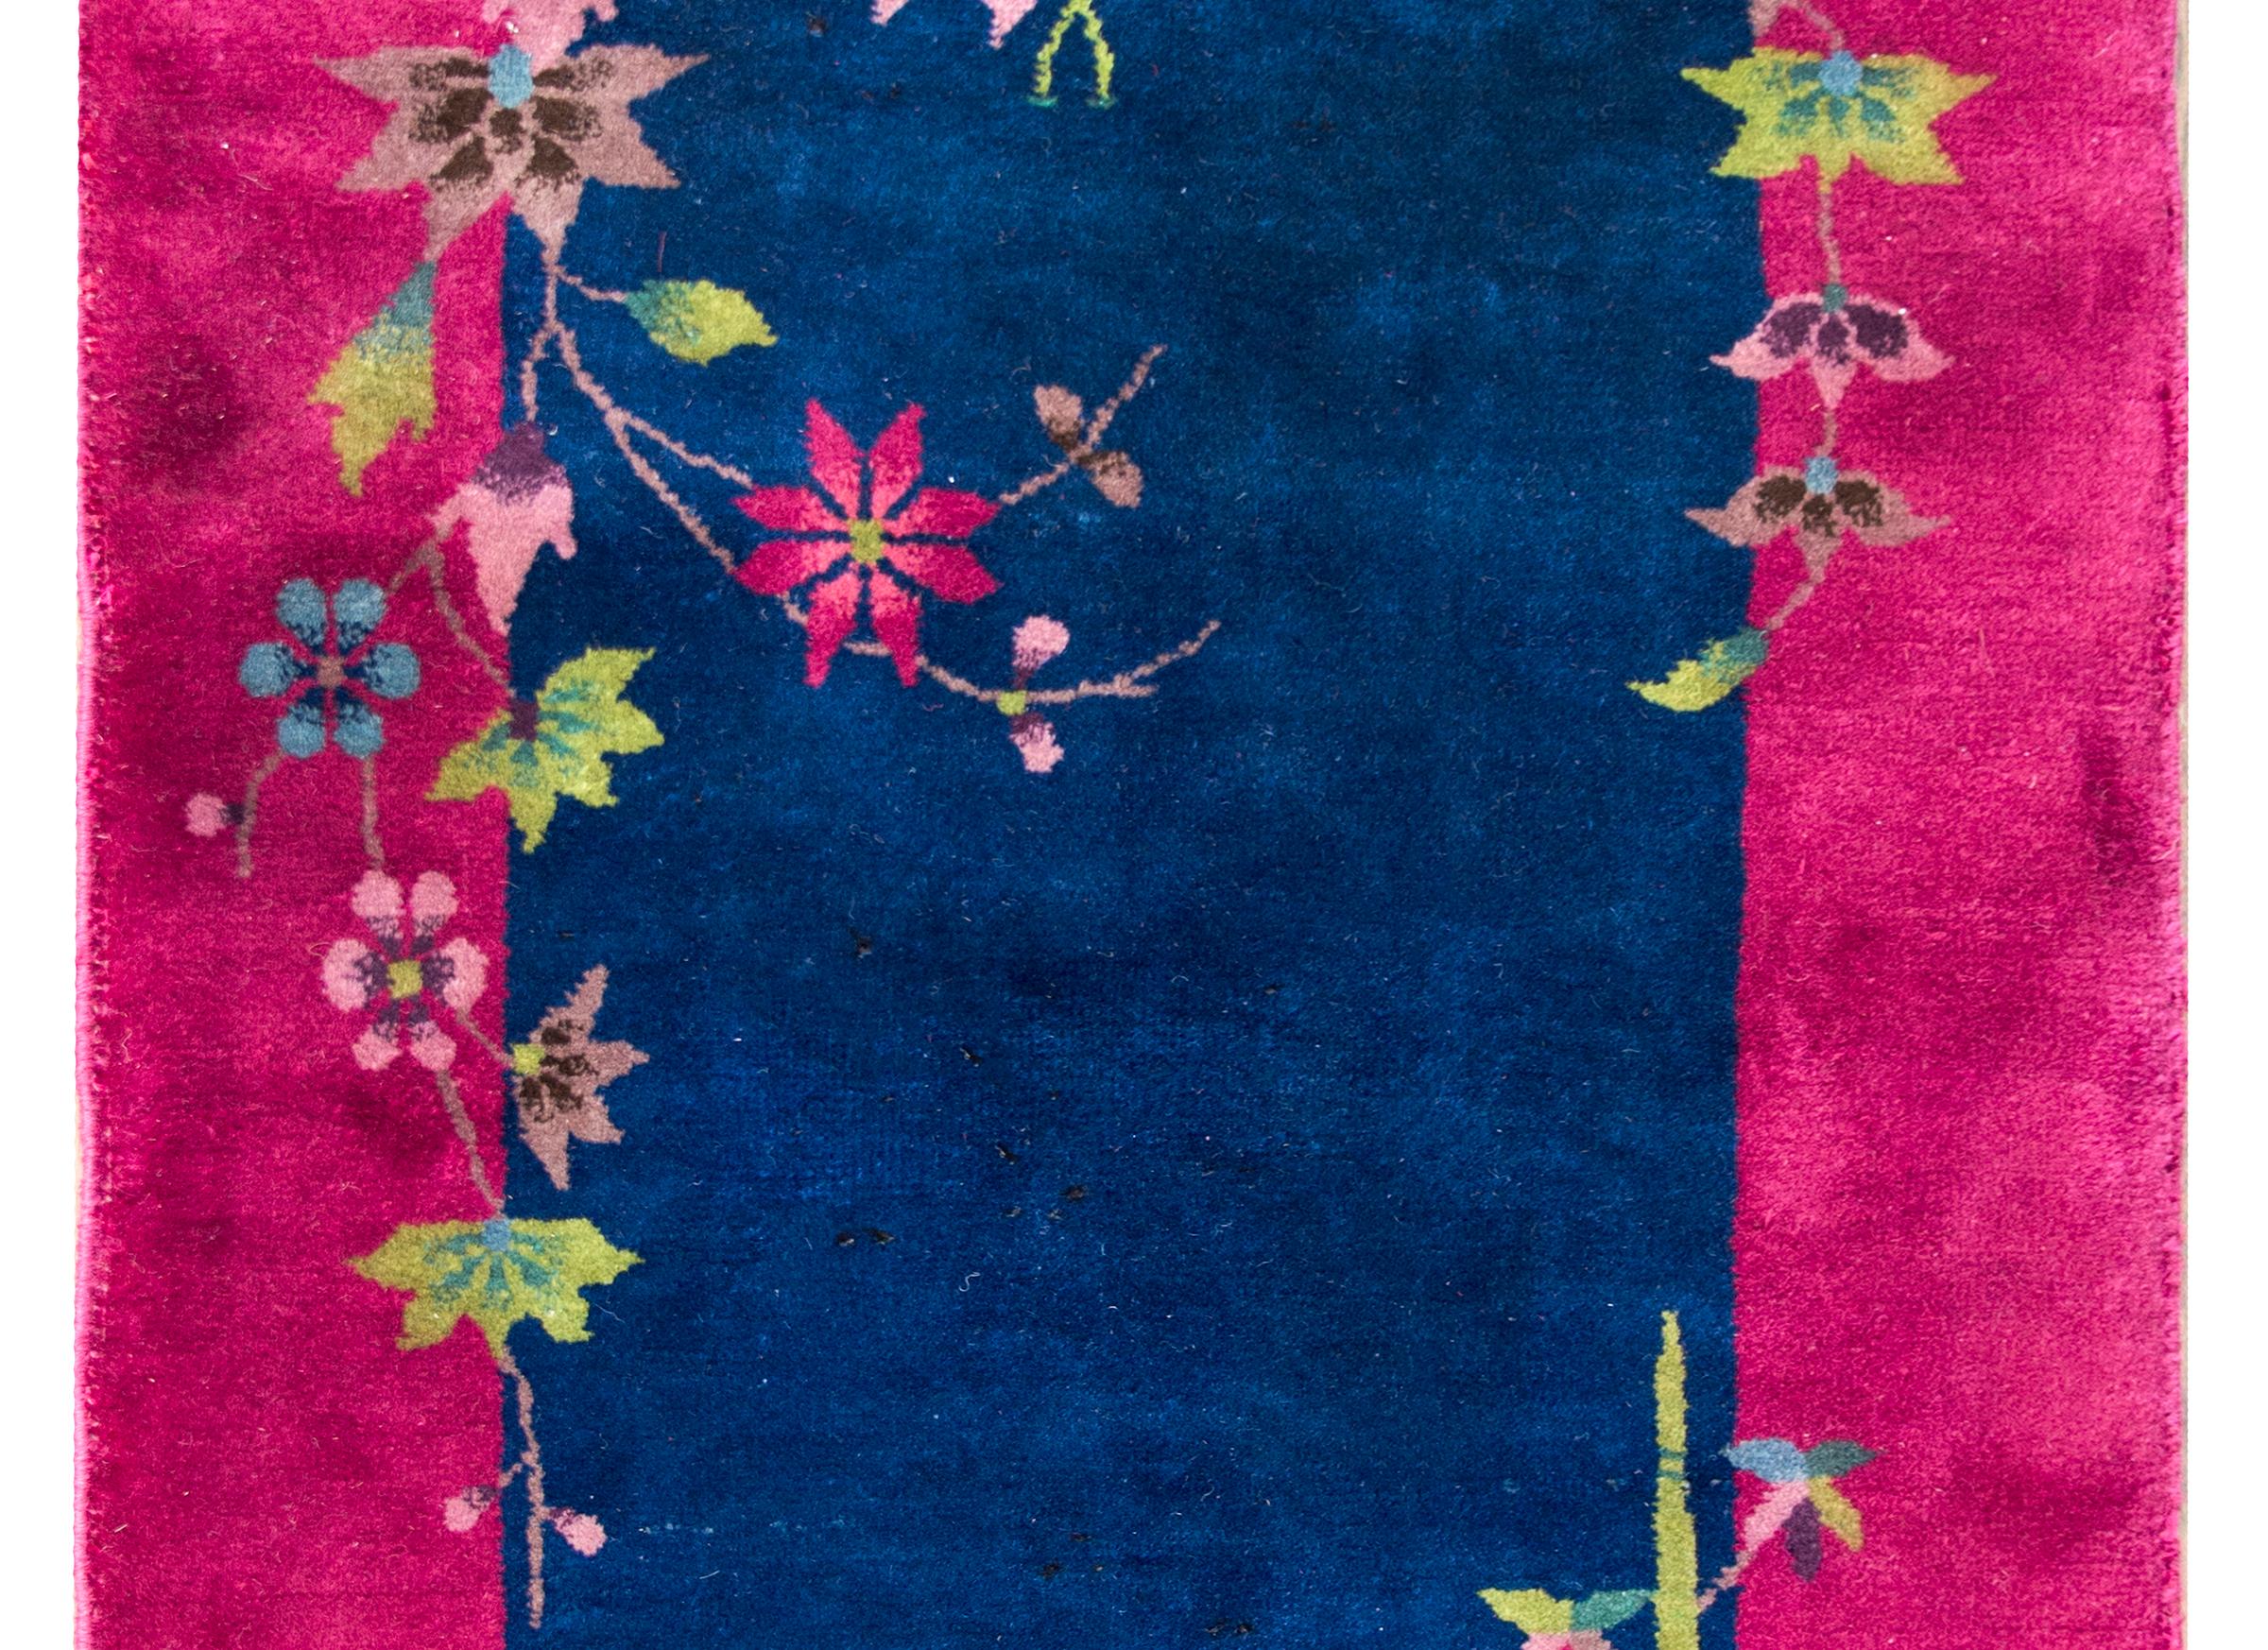 A wonderful early 20th century Chinese Art Deco rug with a deep indigo field surrounded by a brilliant fuchsia border, and all overlaid with multi-colored auspicious flowers including chrysanthemums, peonies, lotus, and cherry blossoms.  